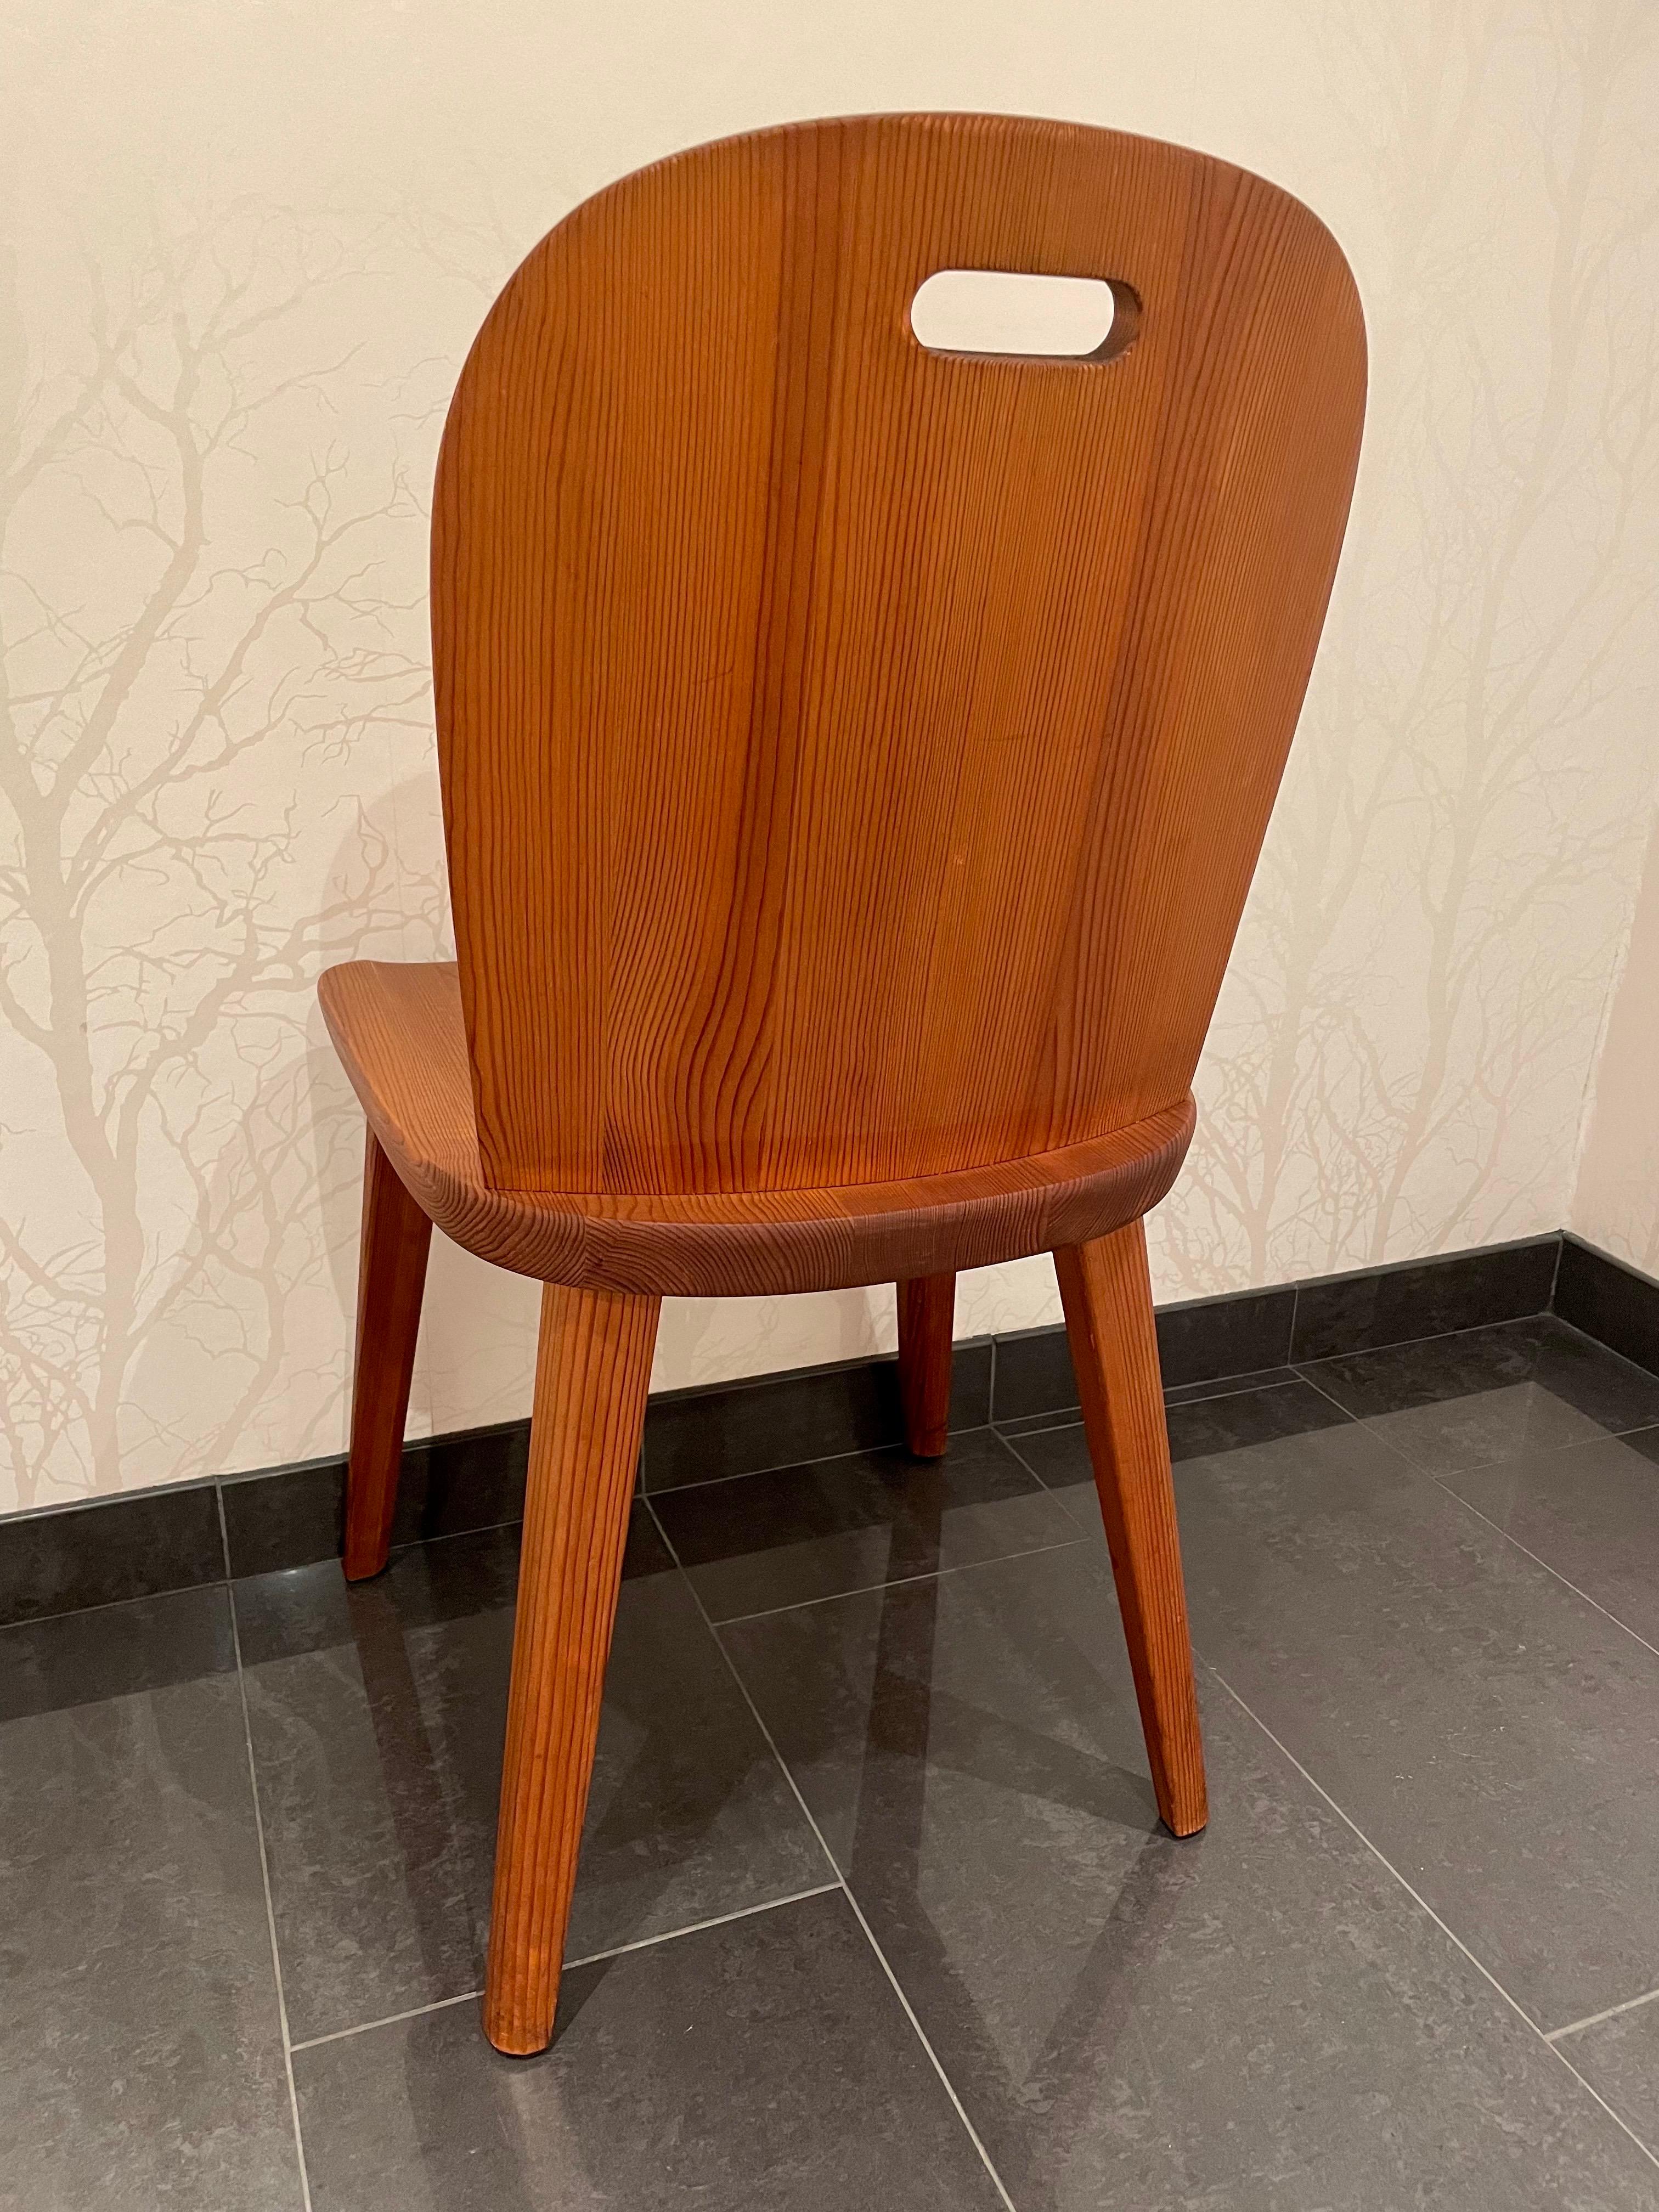 Hand-Carved 1930s Sport Cabin Solid Pine Chairs in Axel Einar Hjorth Style by Åby Möbler  For Sale